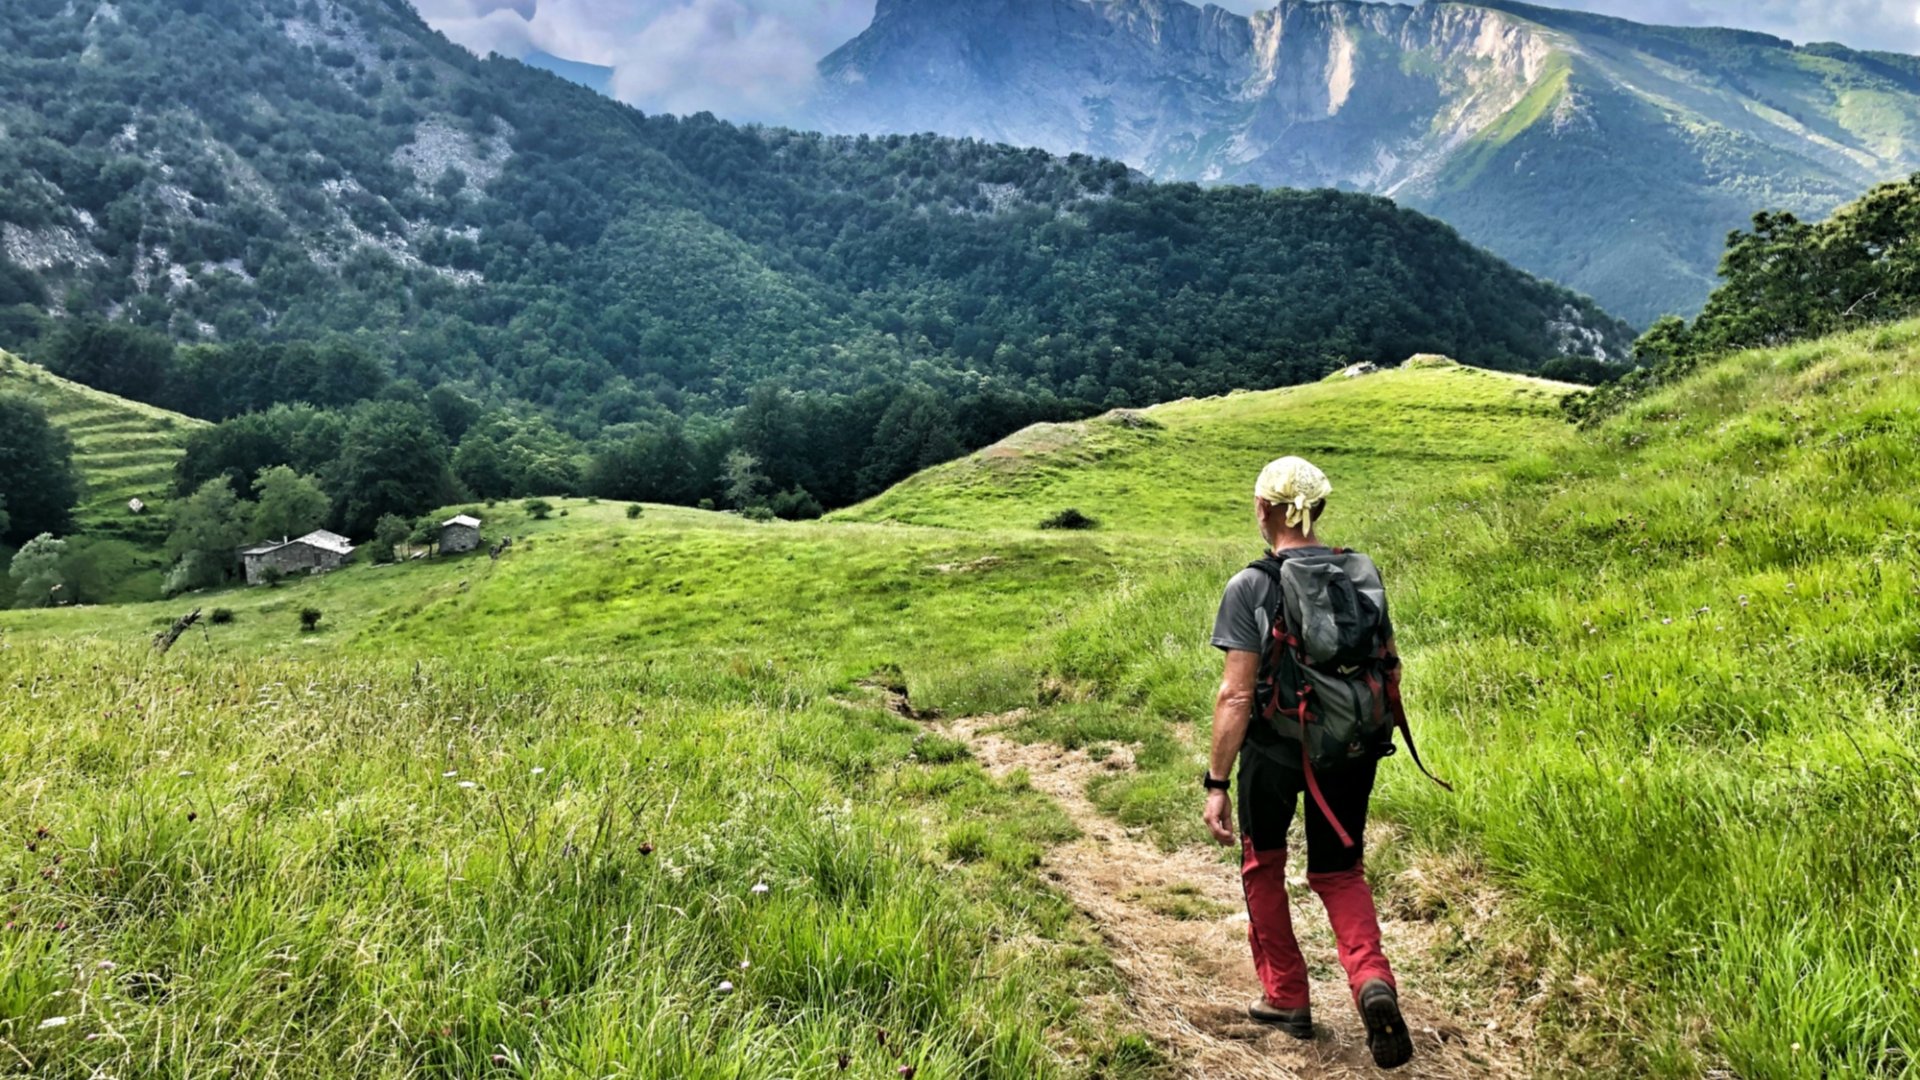 Trekking in the Apuan Alps Tuscany